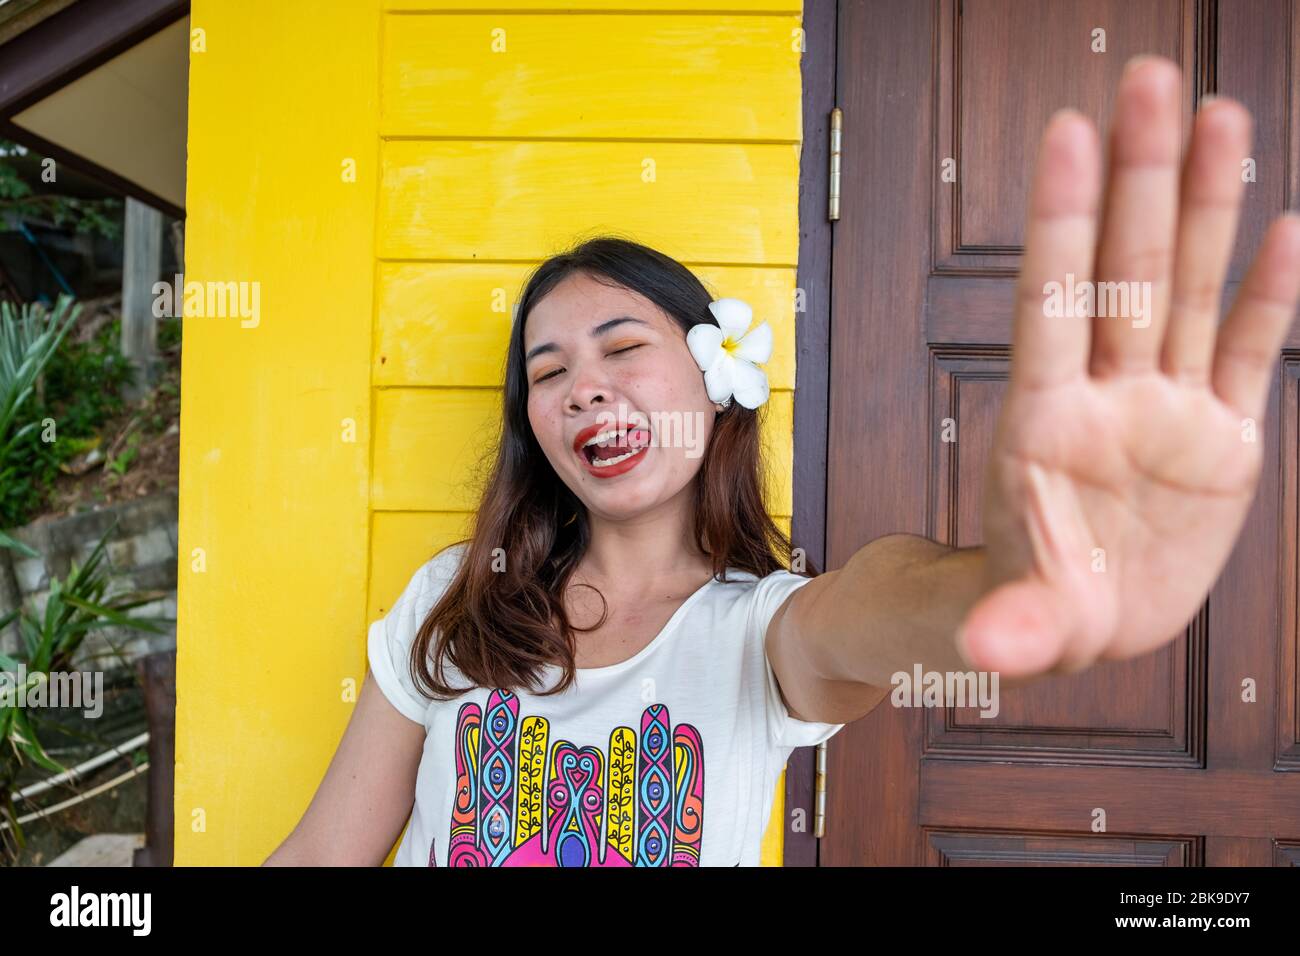 Asian woman , show palms, hands, stop sign. Focus on the face. Cute thai girl making a funny face Stock Photo